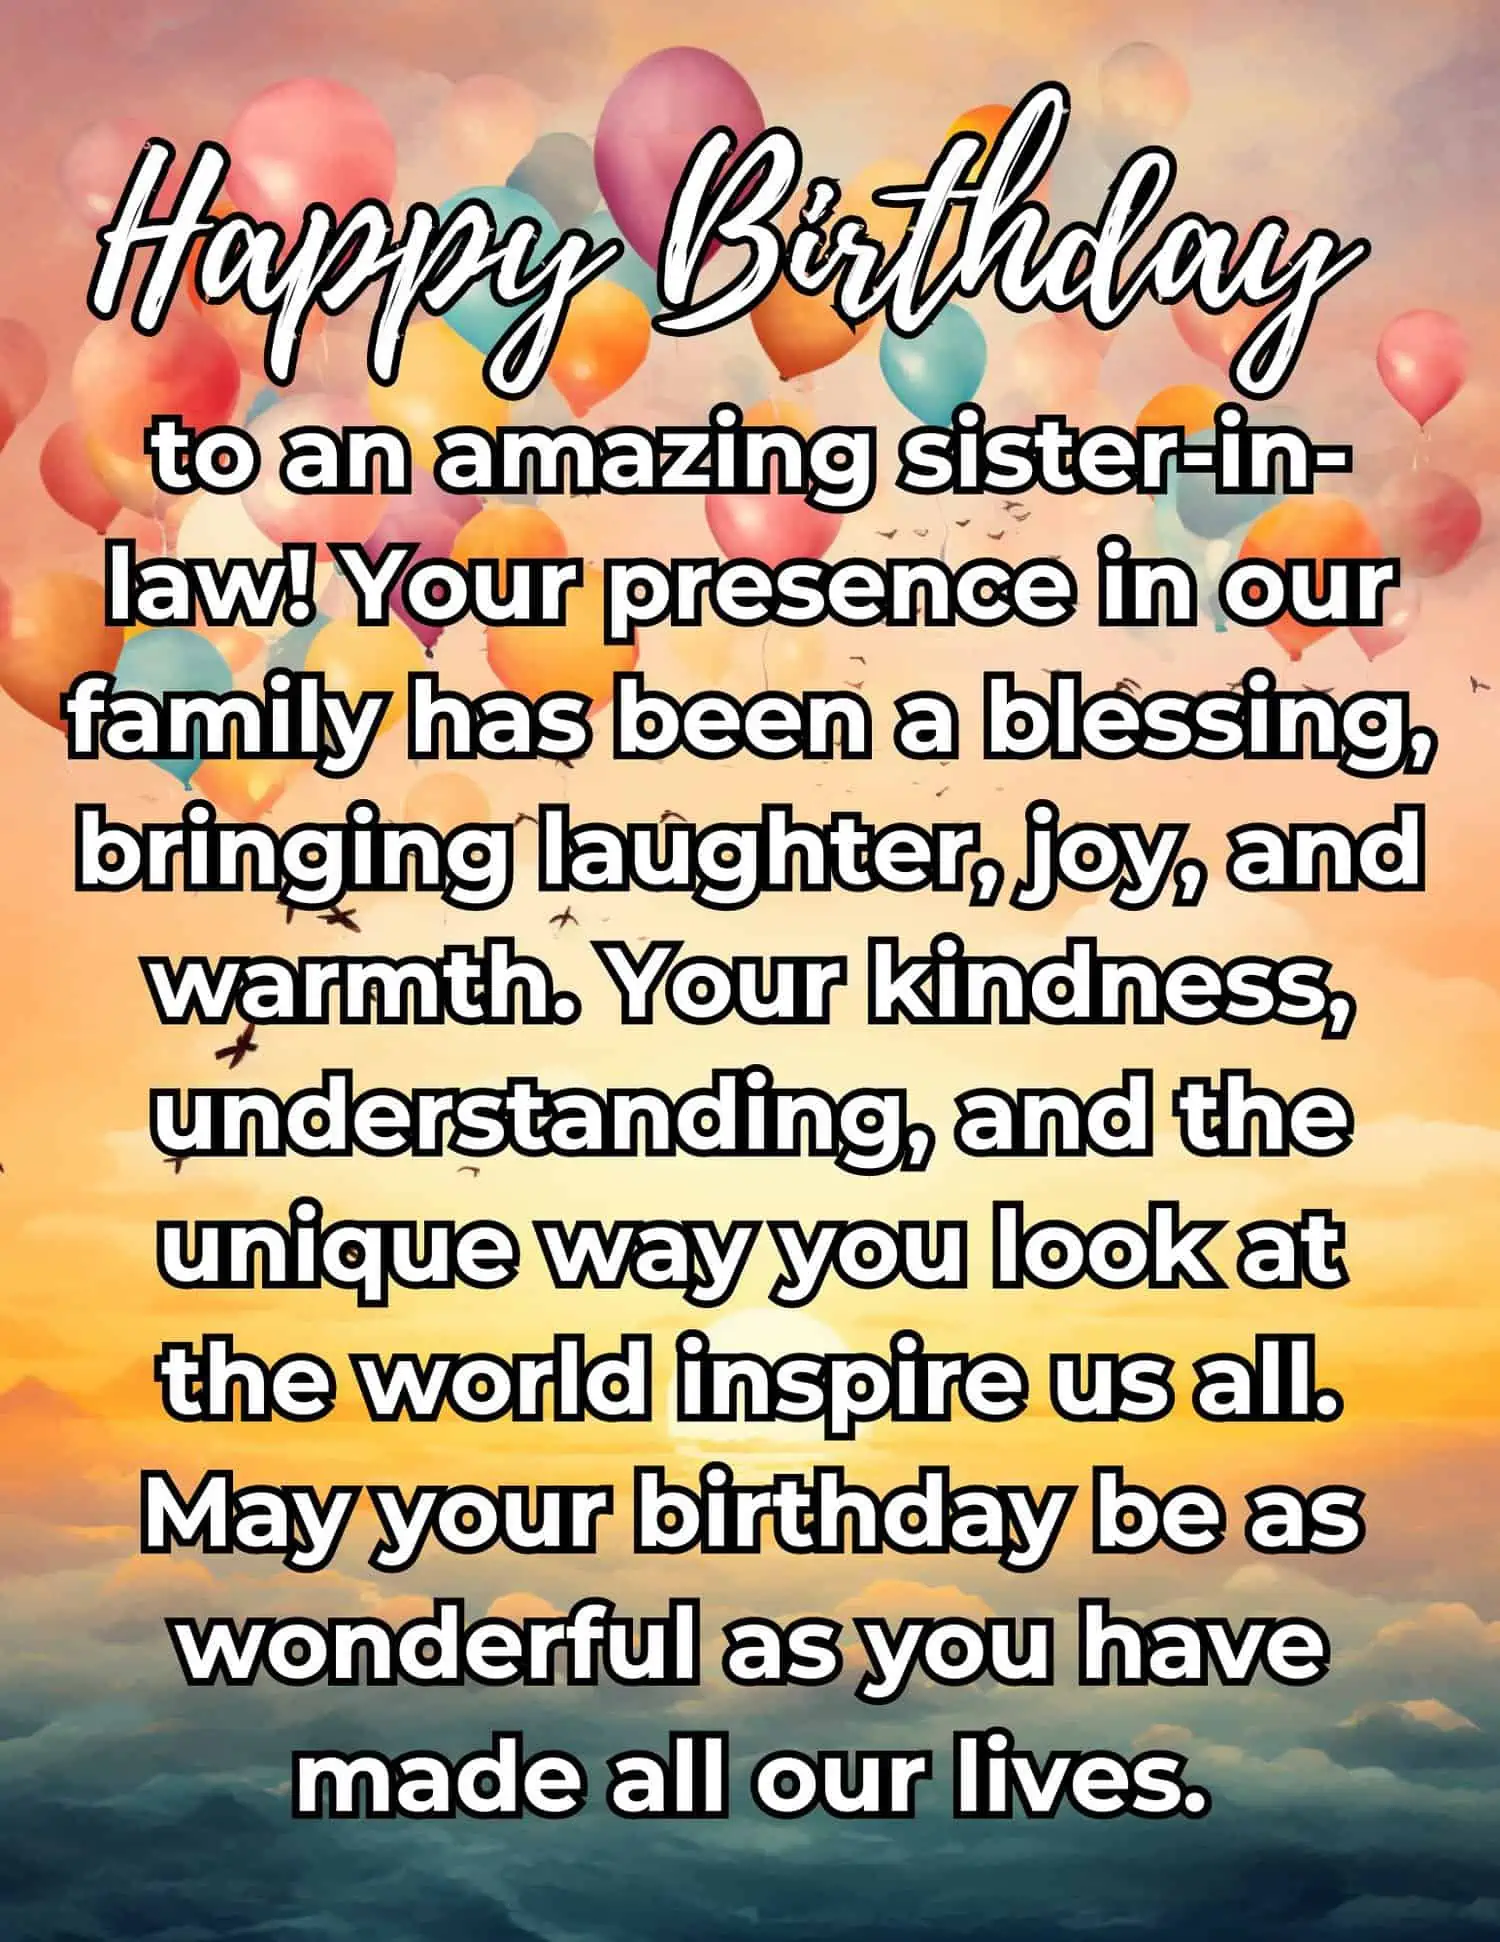 A collection of longer, heartfelt birthday wishes crafted to convey deep appreciation and sincere emotions for a sister-in-law on her special day.